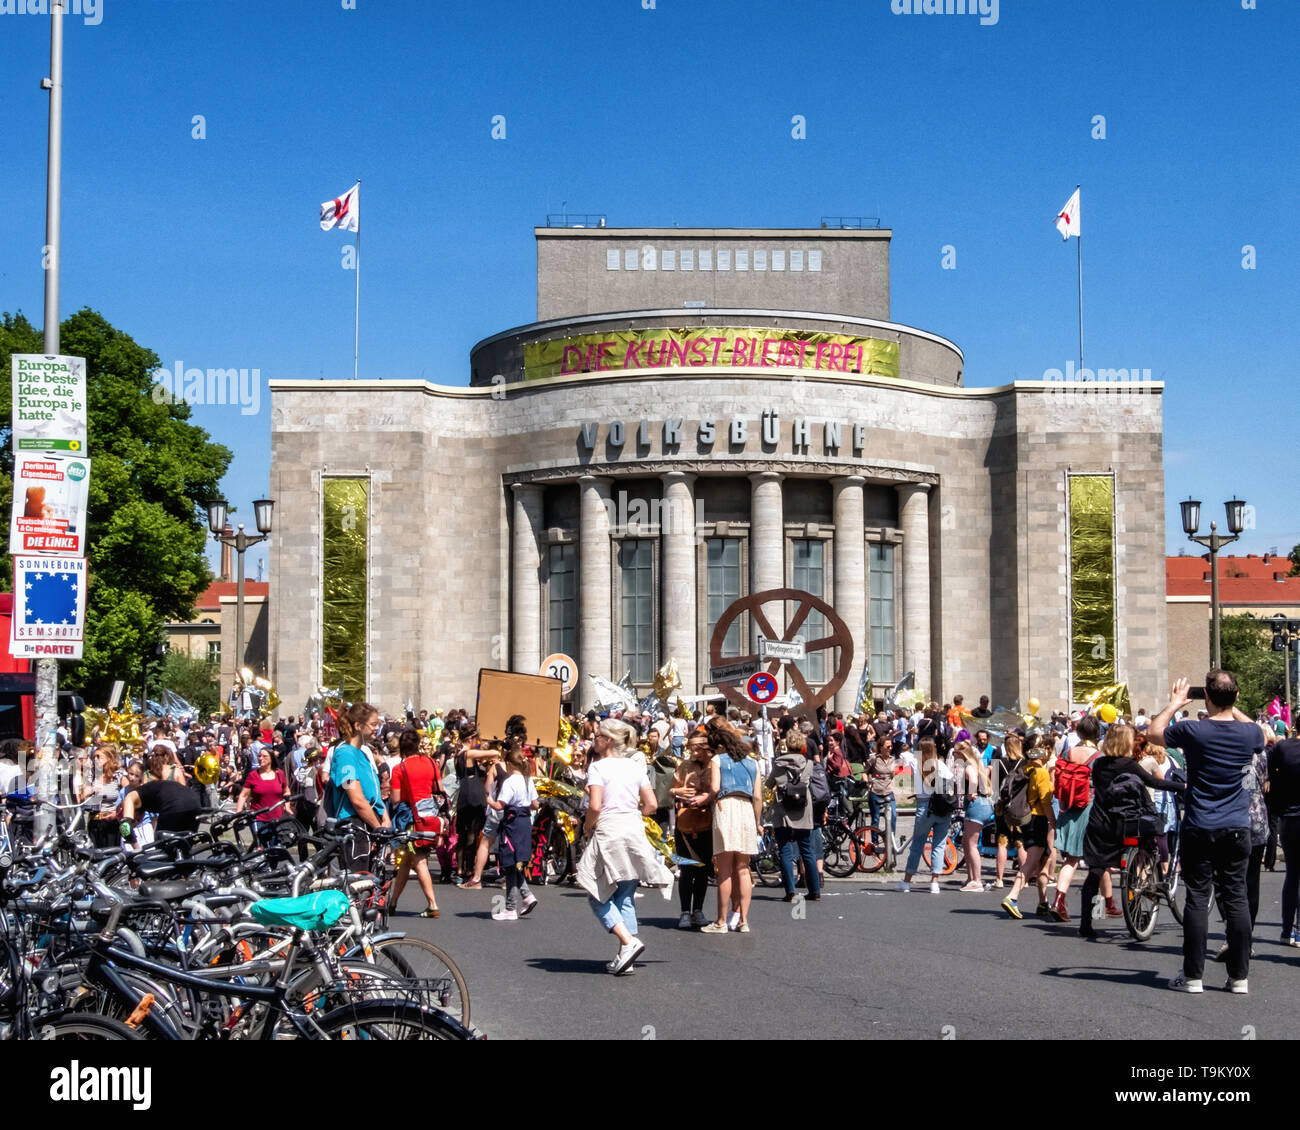 Germany, Berlin, Mitte. May 19, 2019. Unite & Shine Parade at Rosa-Luxemburg-Platz. Demonstration for solidarity in Europe before the upcoming European Elections. People unite under the slogan ‘For a Europe of the many’ in a move against nationalism, exclusion, racism, and the restrictions of artistic freedom in Europe. The demo was organised by ‘Die Vielen’ (The Many) - an organization that was founded in 2017 to actively foster democratic culture. Credit: Eden Breitz/Alamy Stock Photo